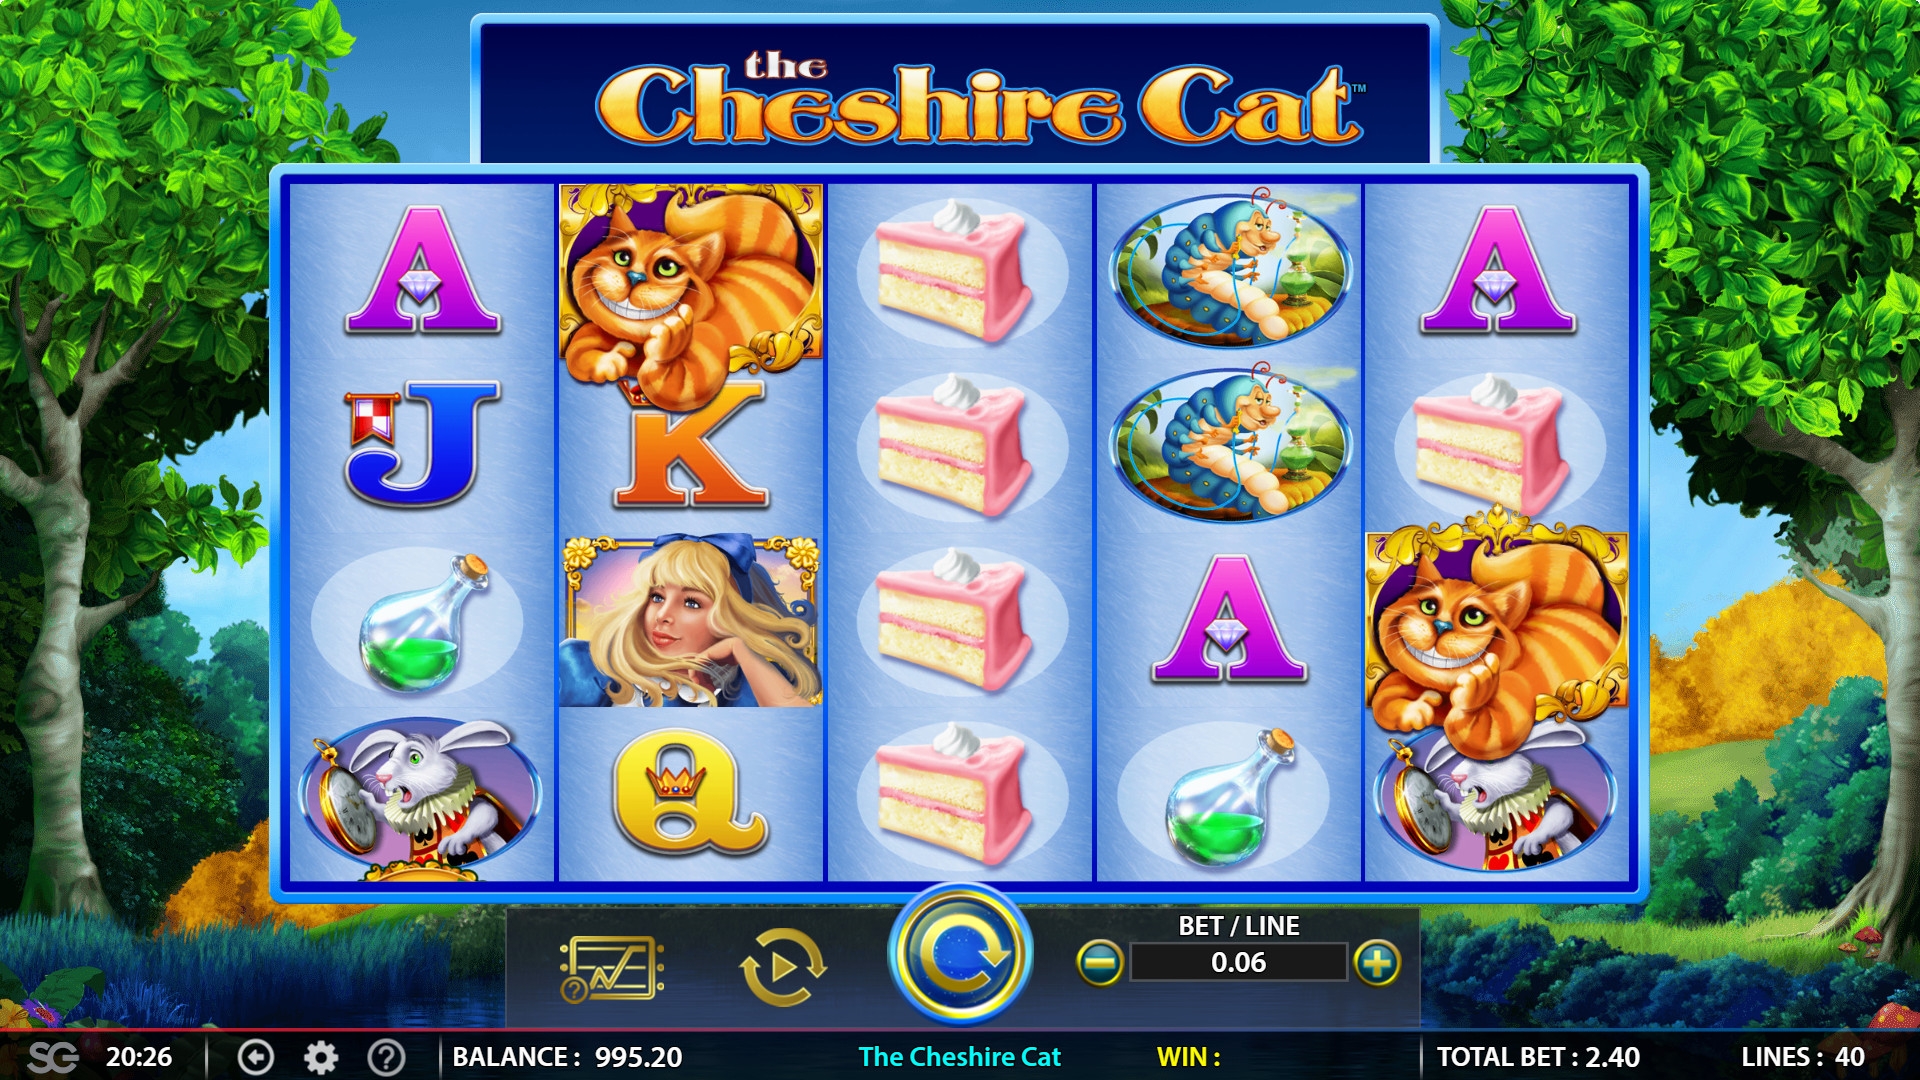 The Cheshire Cat (The Cheshire Cat) from category Slots